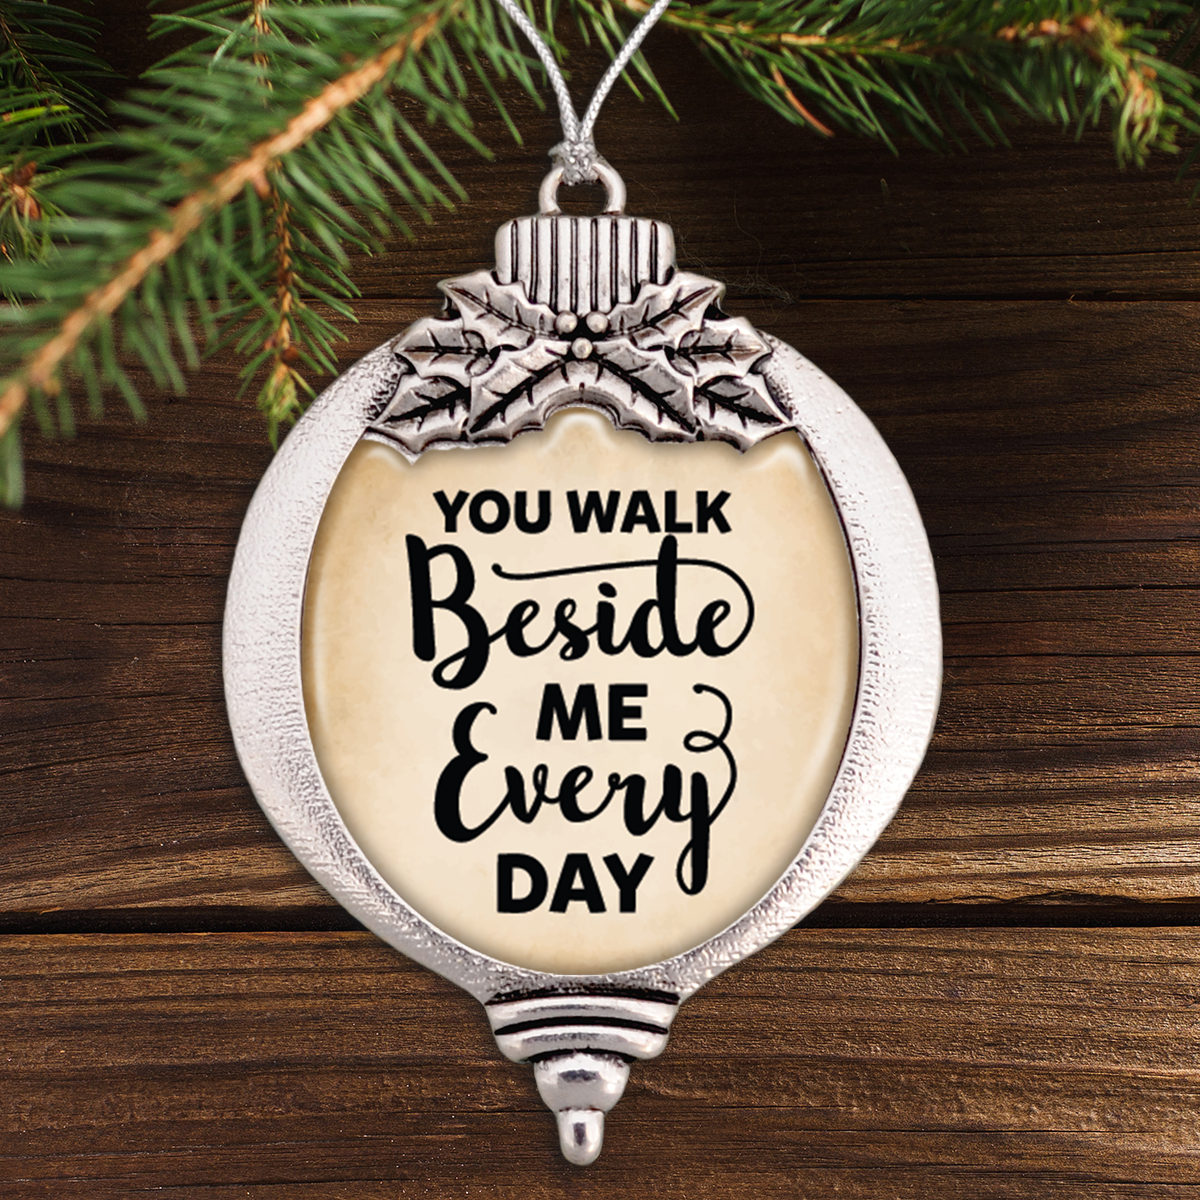 You Walk Beside Me Every Day Bulb Ornament